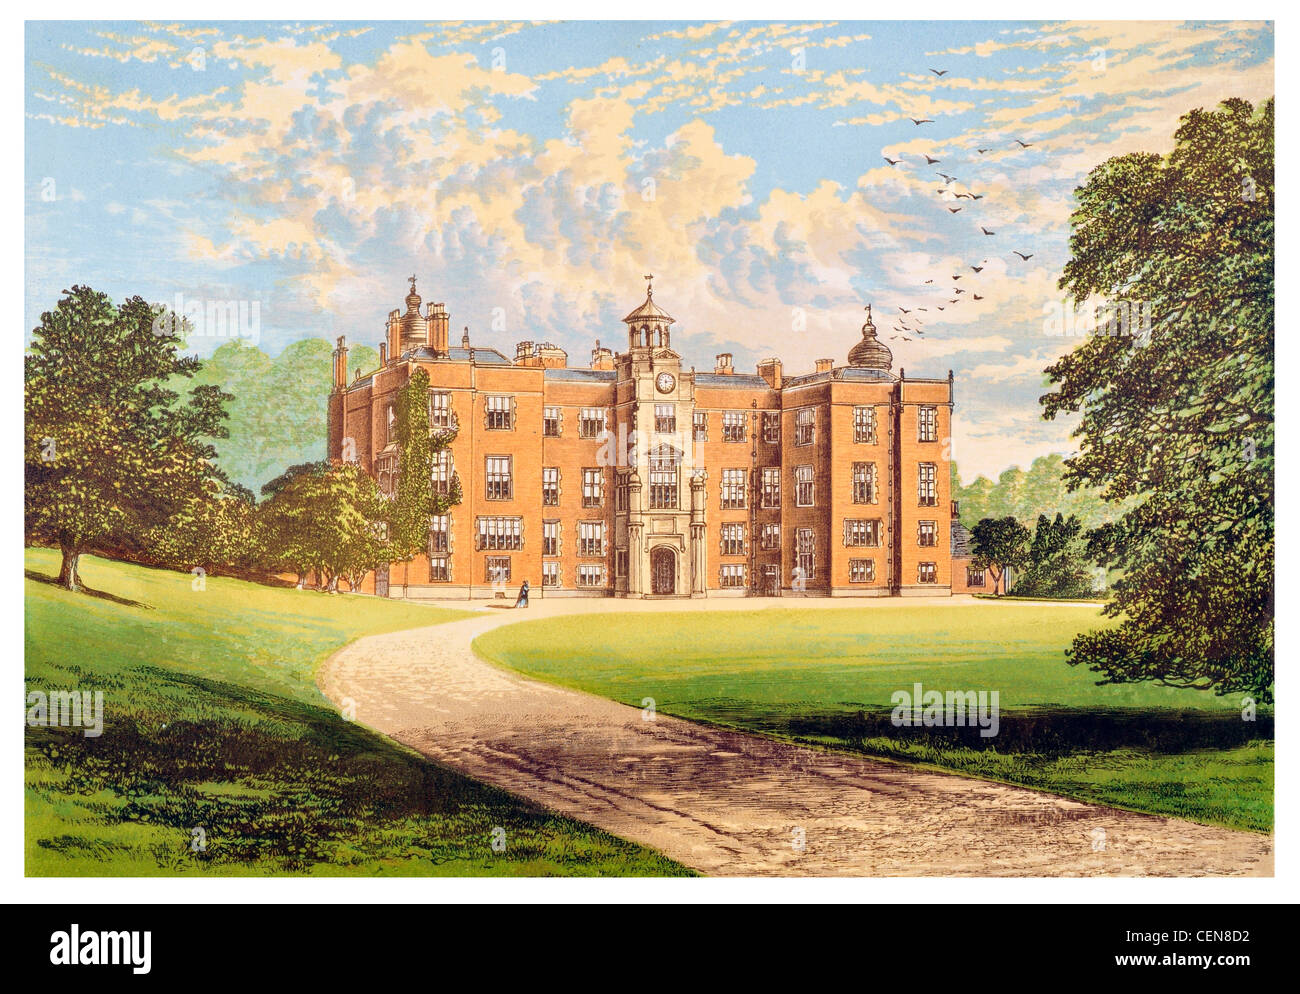 Beaudesert stately home Cannock Chase Staffordshire England Mansion Great Hall Stock Photo